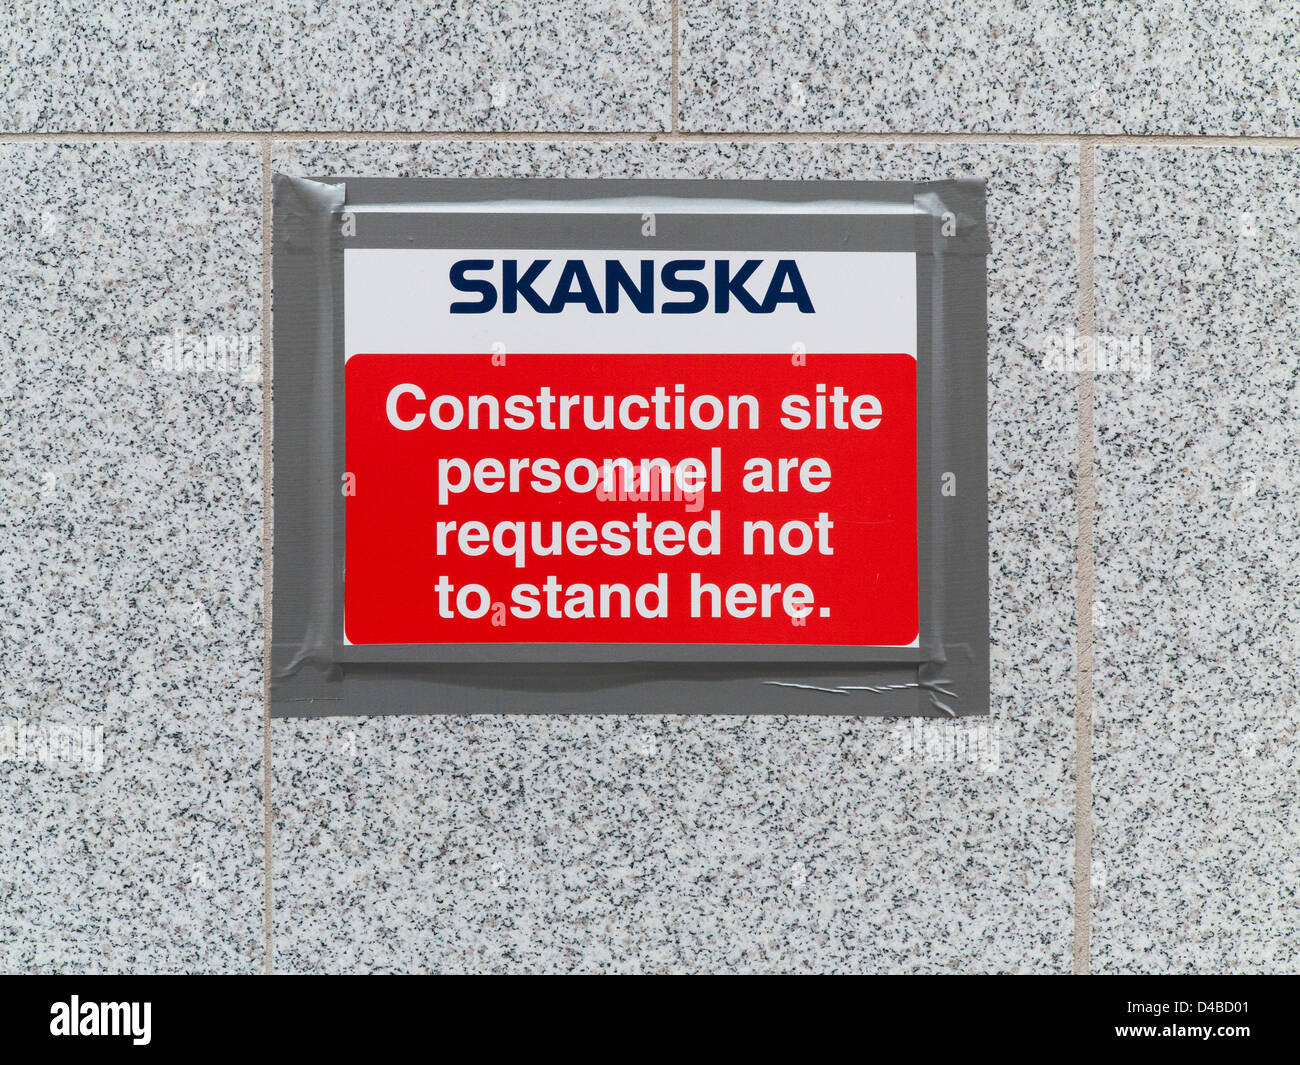 Skanska warning sign asking construction personnel not to stand here, London, England Stock Photo